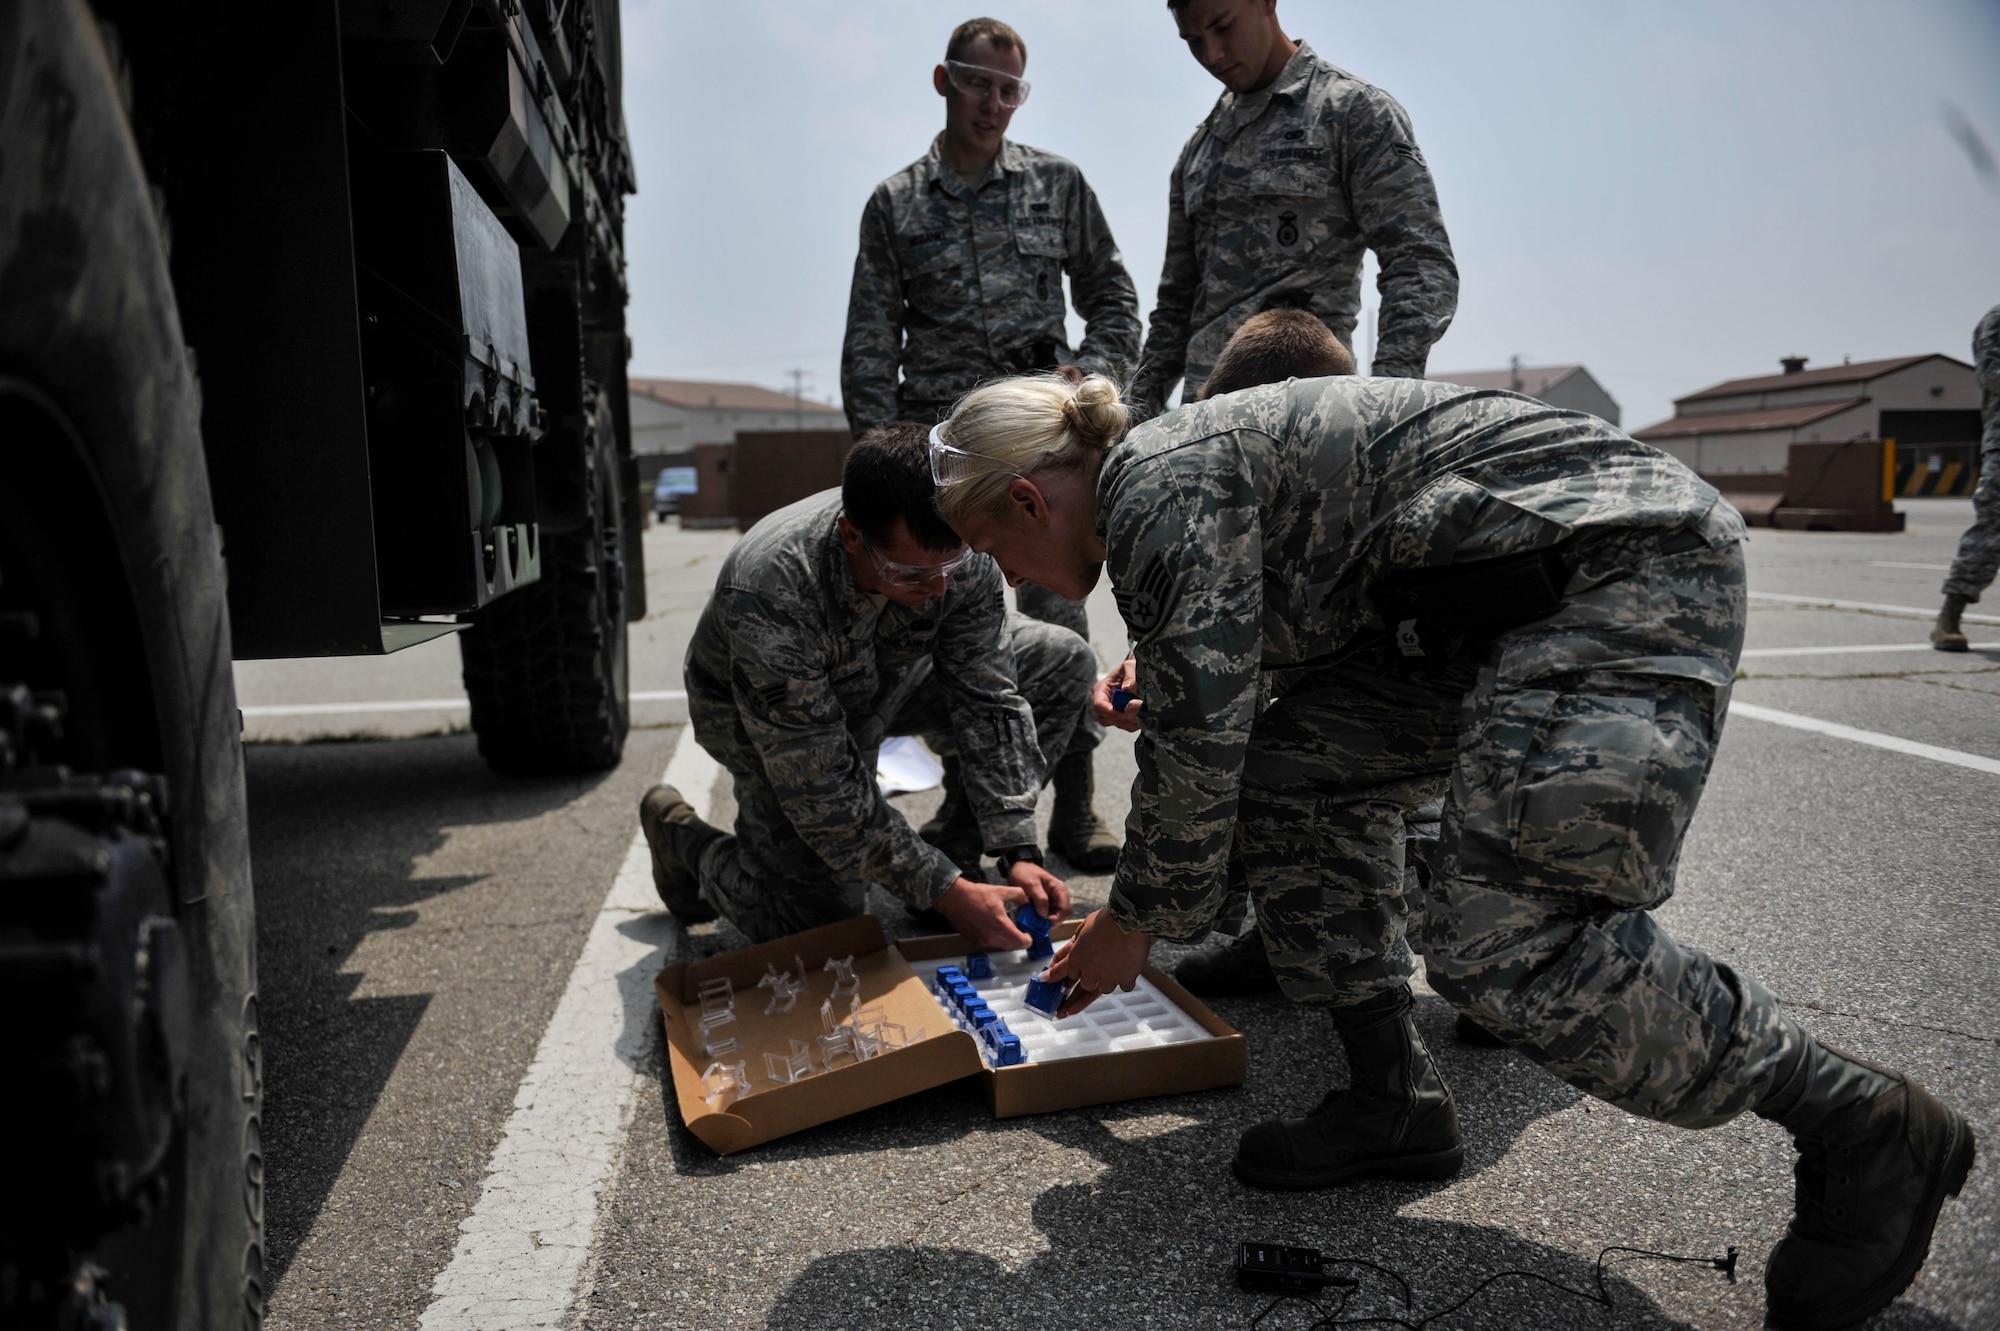 Airmen from the 51st Security Forces Squadron pick up cartridges during Taser training on Osan Air Base, Republic of Korea, June 27, 2014. Airmen must go through Taser International training, pass a written test and be able to effectively engage a target with a minimum of two Taser cartridges before they can carry a Taser. (U.S. Air Force photo/Senior Airman David Owsianka)